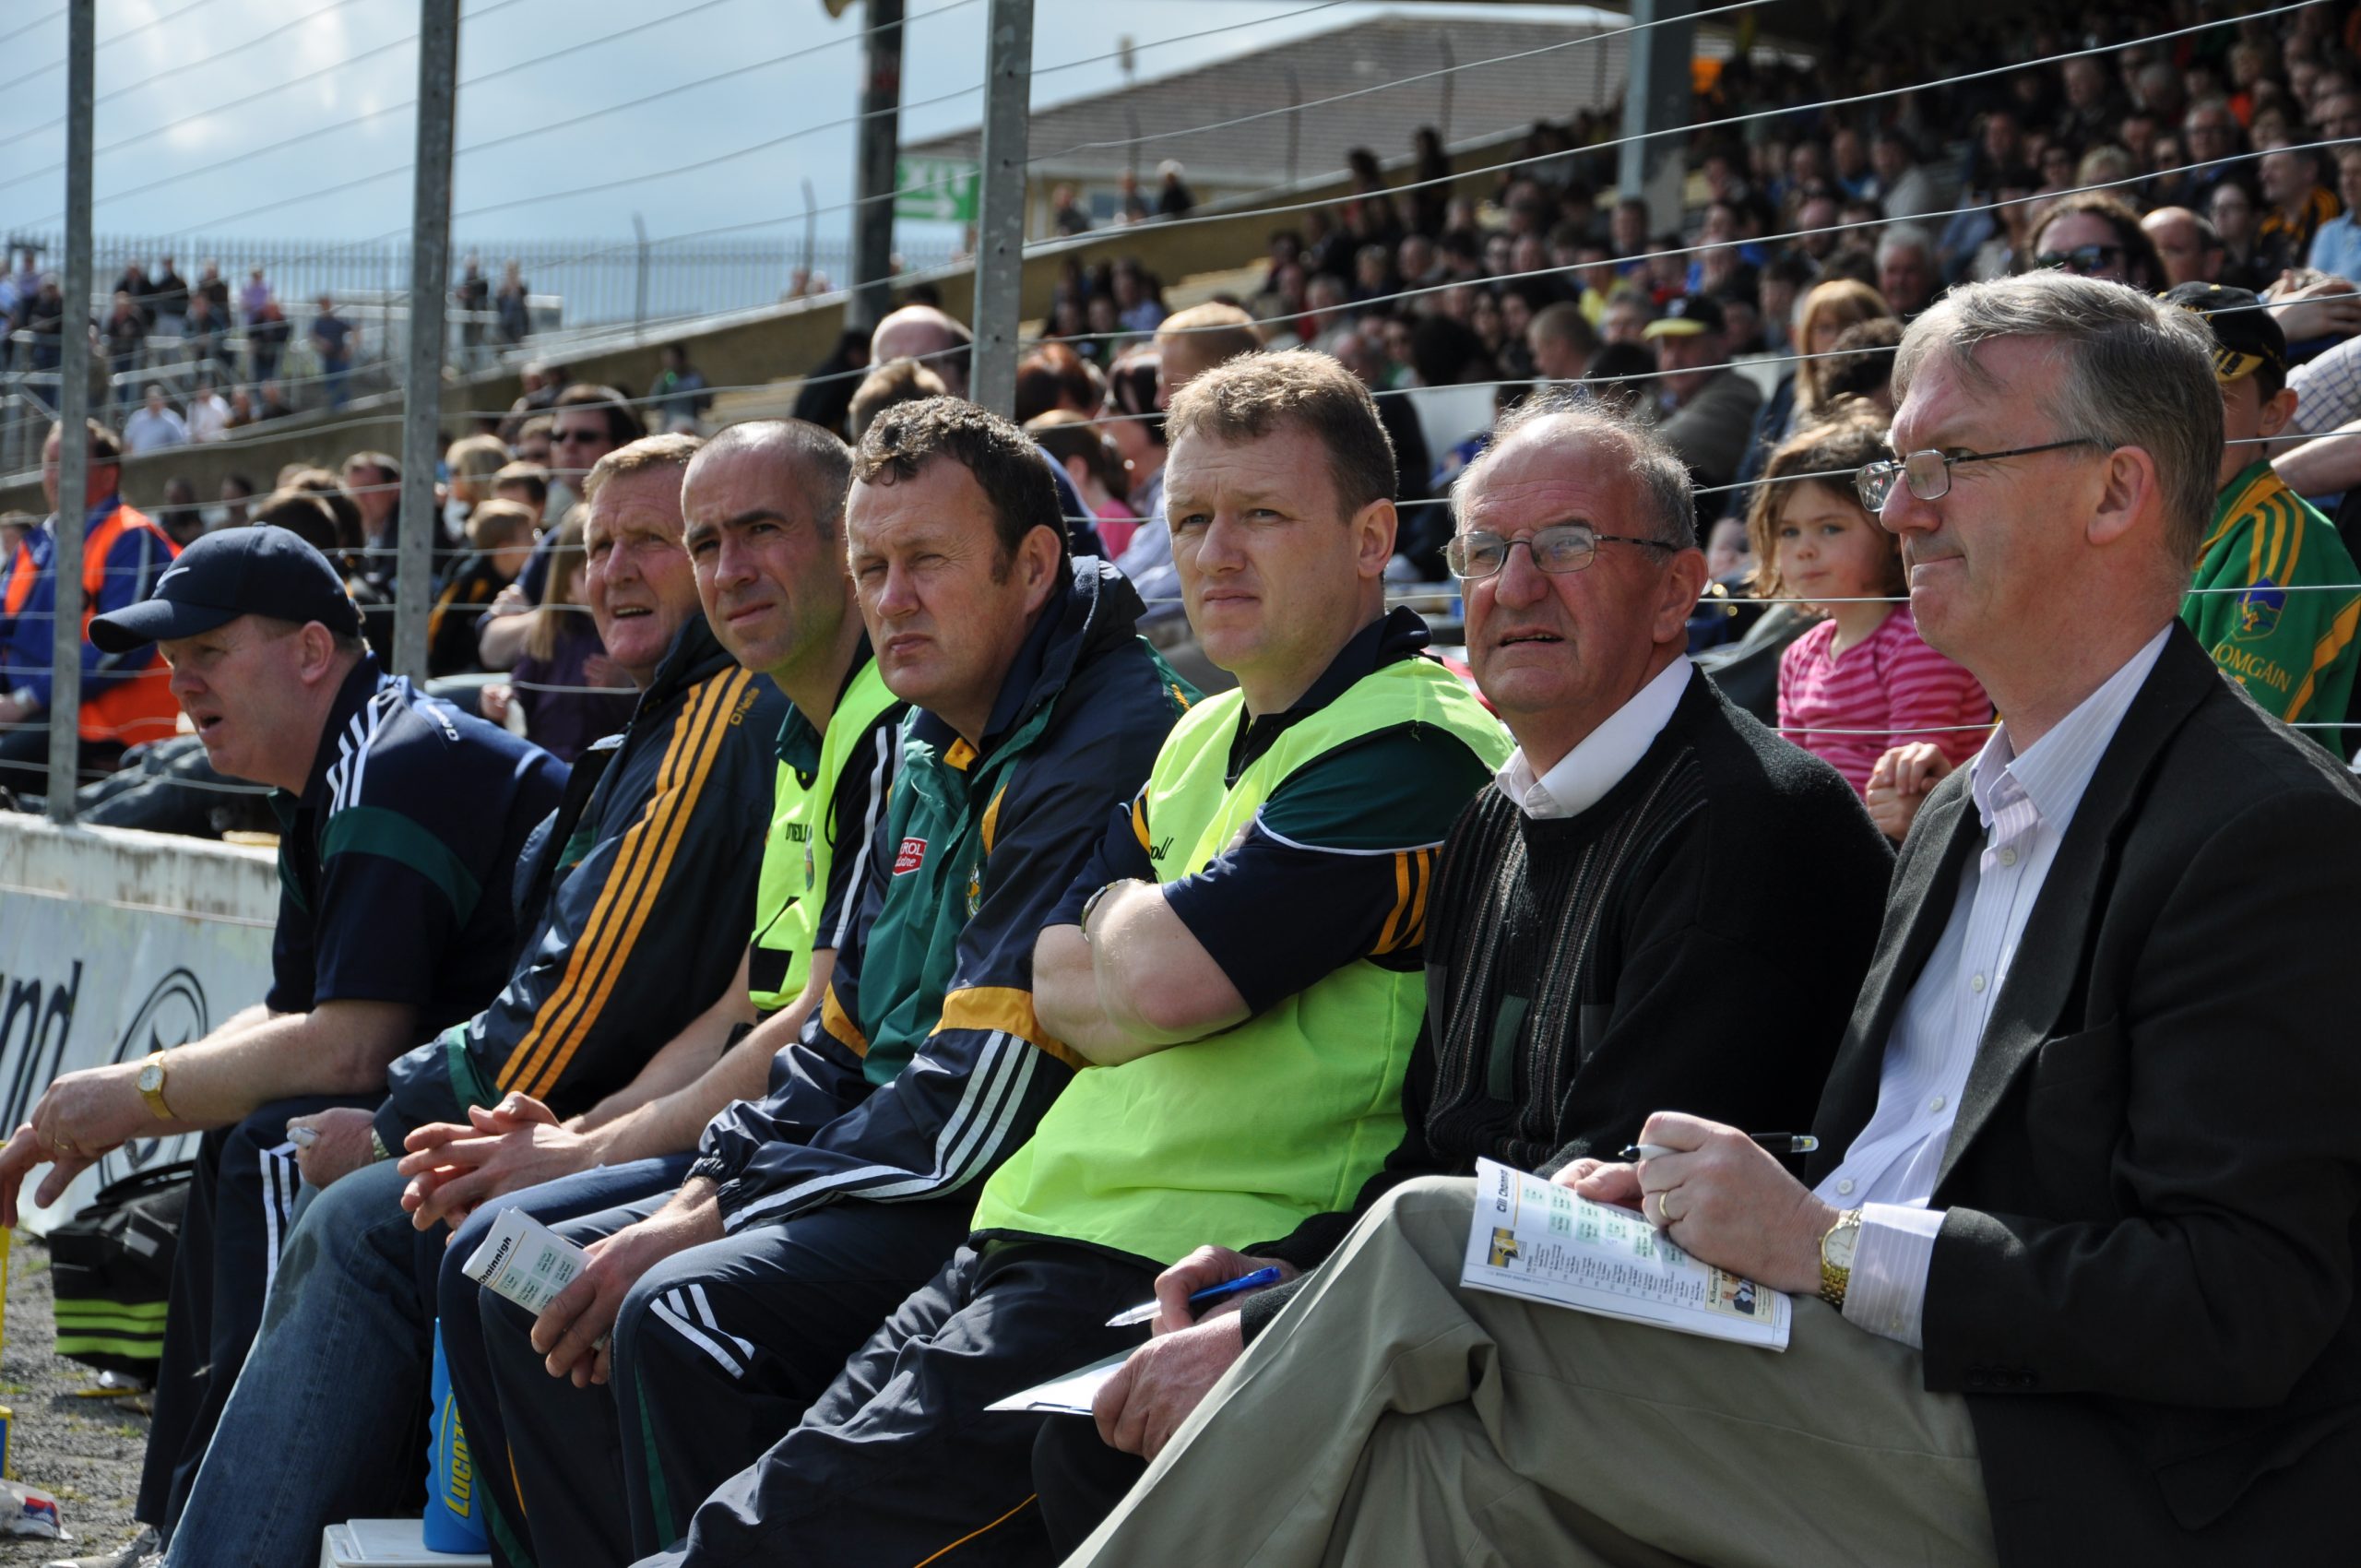 Mentors, substitues and fourth officials change sides in Nowlan Park